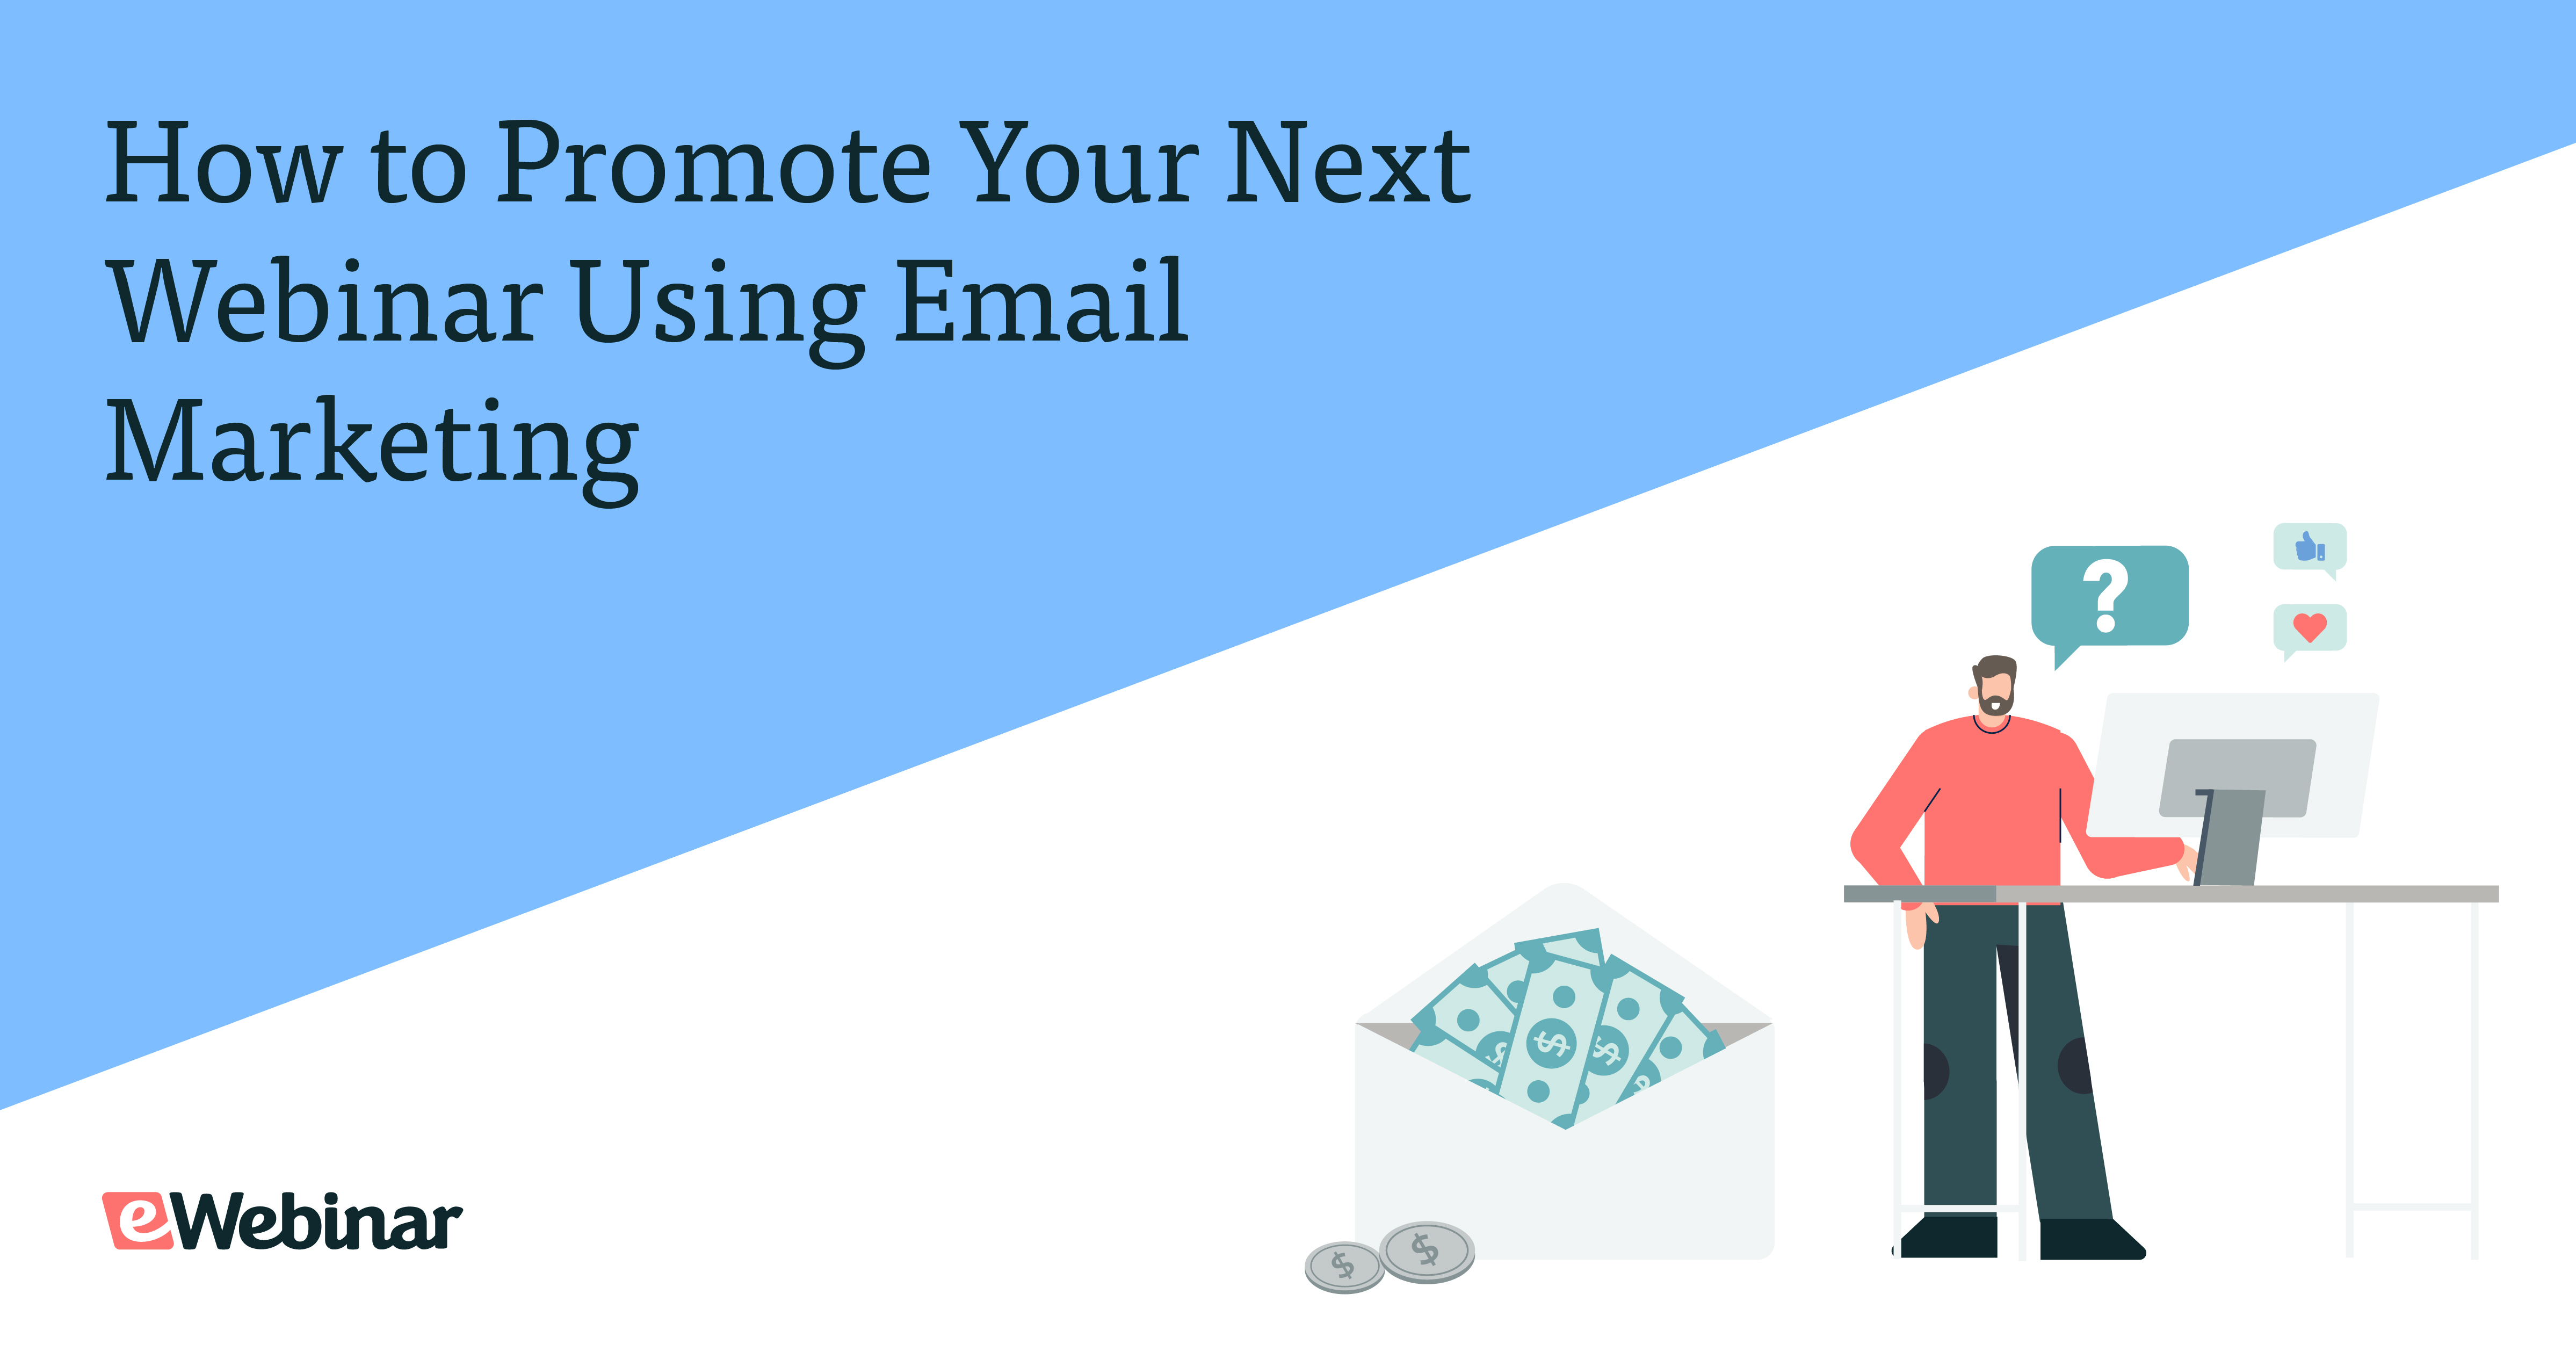 How to Promote Your Next Webinar Using Email Marketing